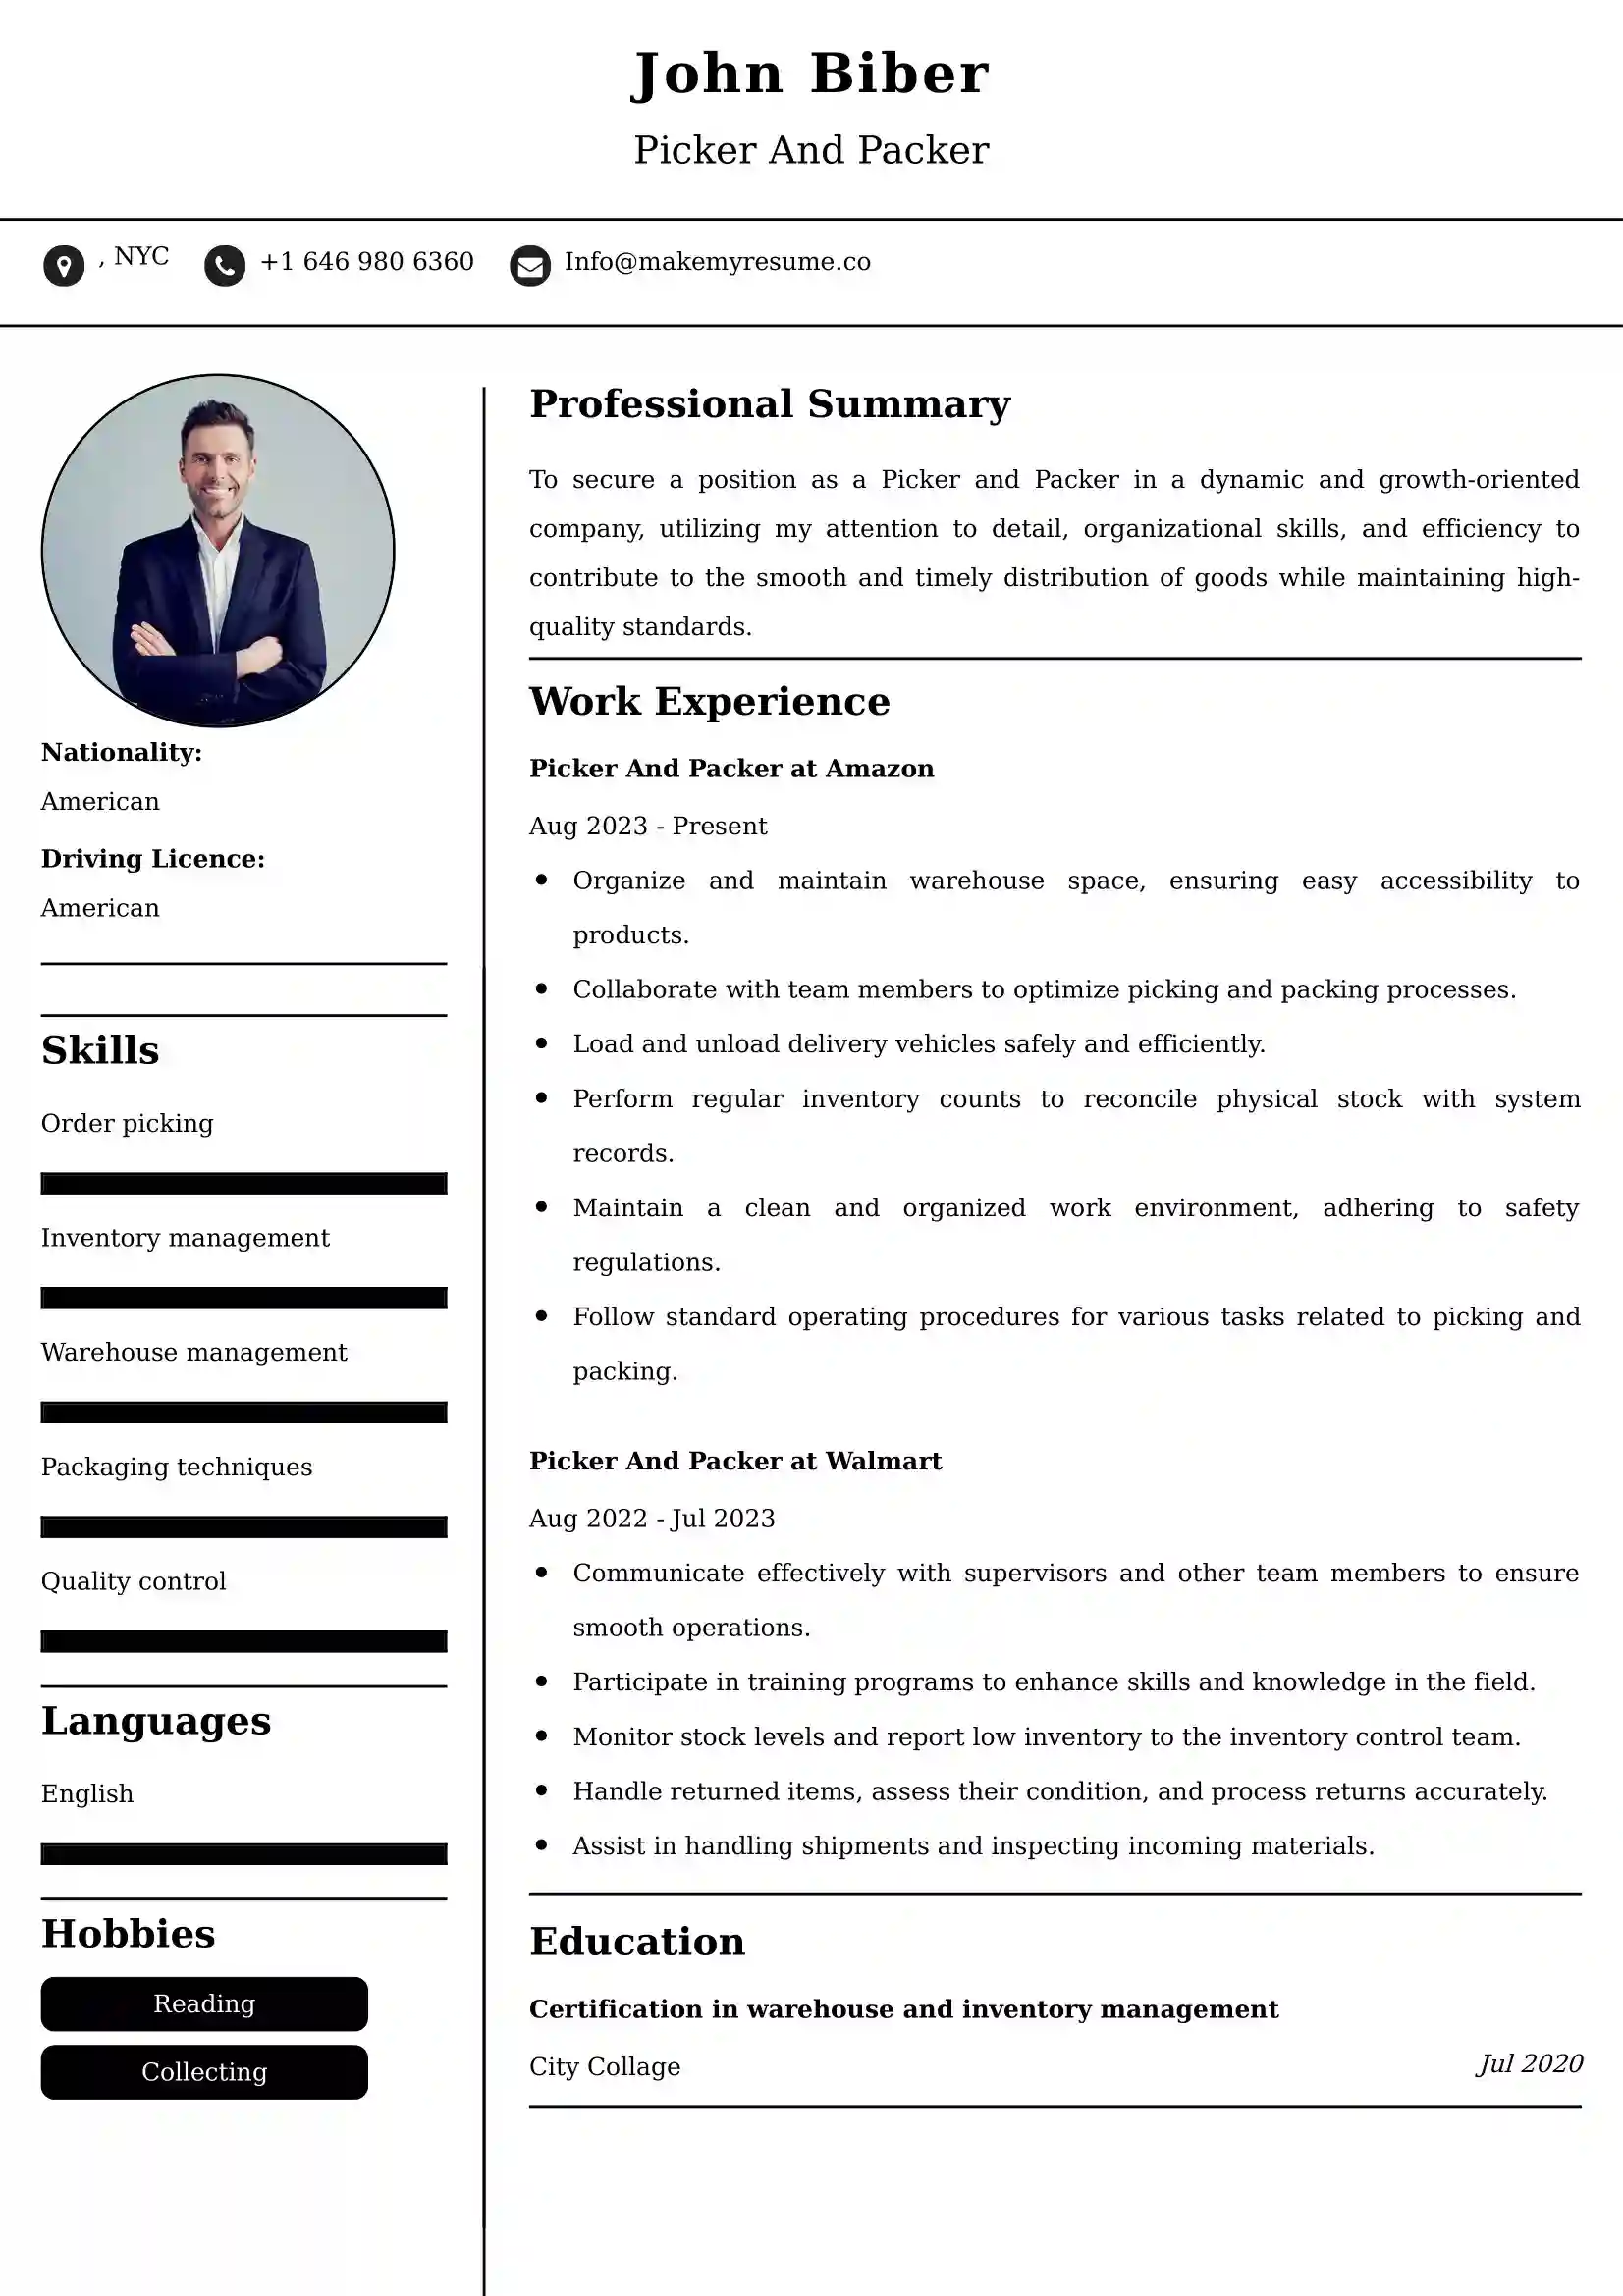 Picker And Packer Resume Examples - Brazilian Format, Latest Template